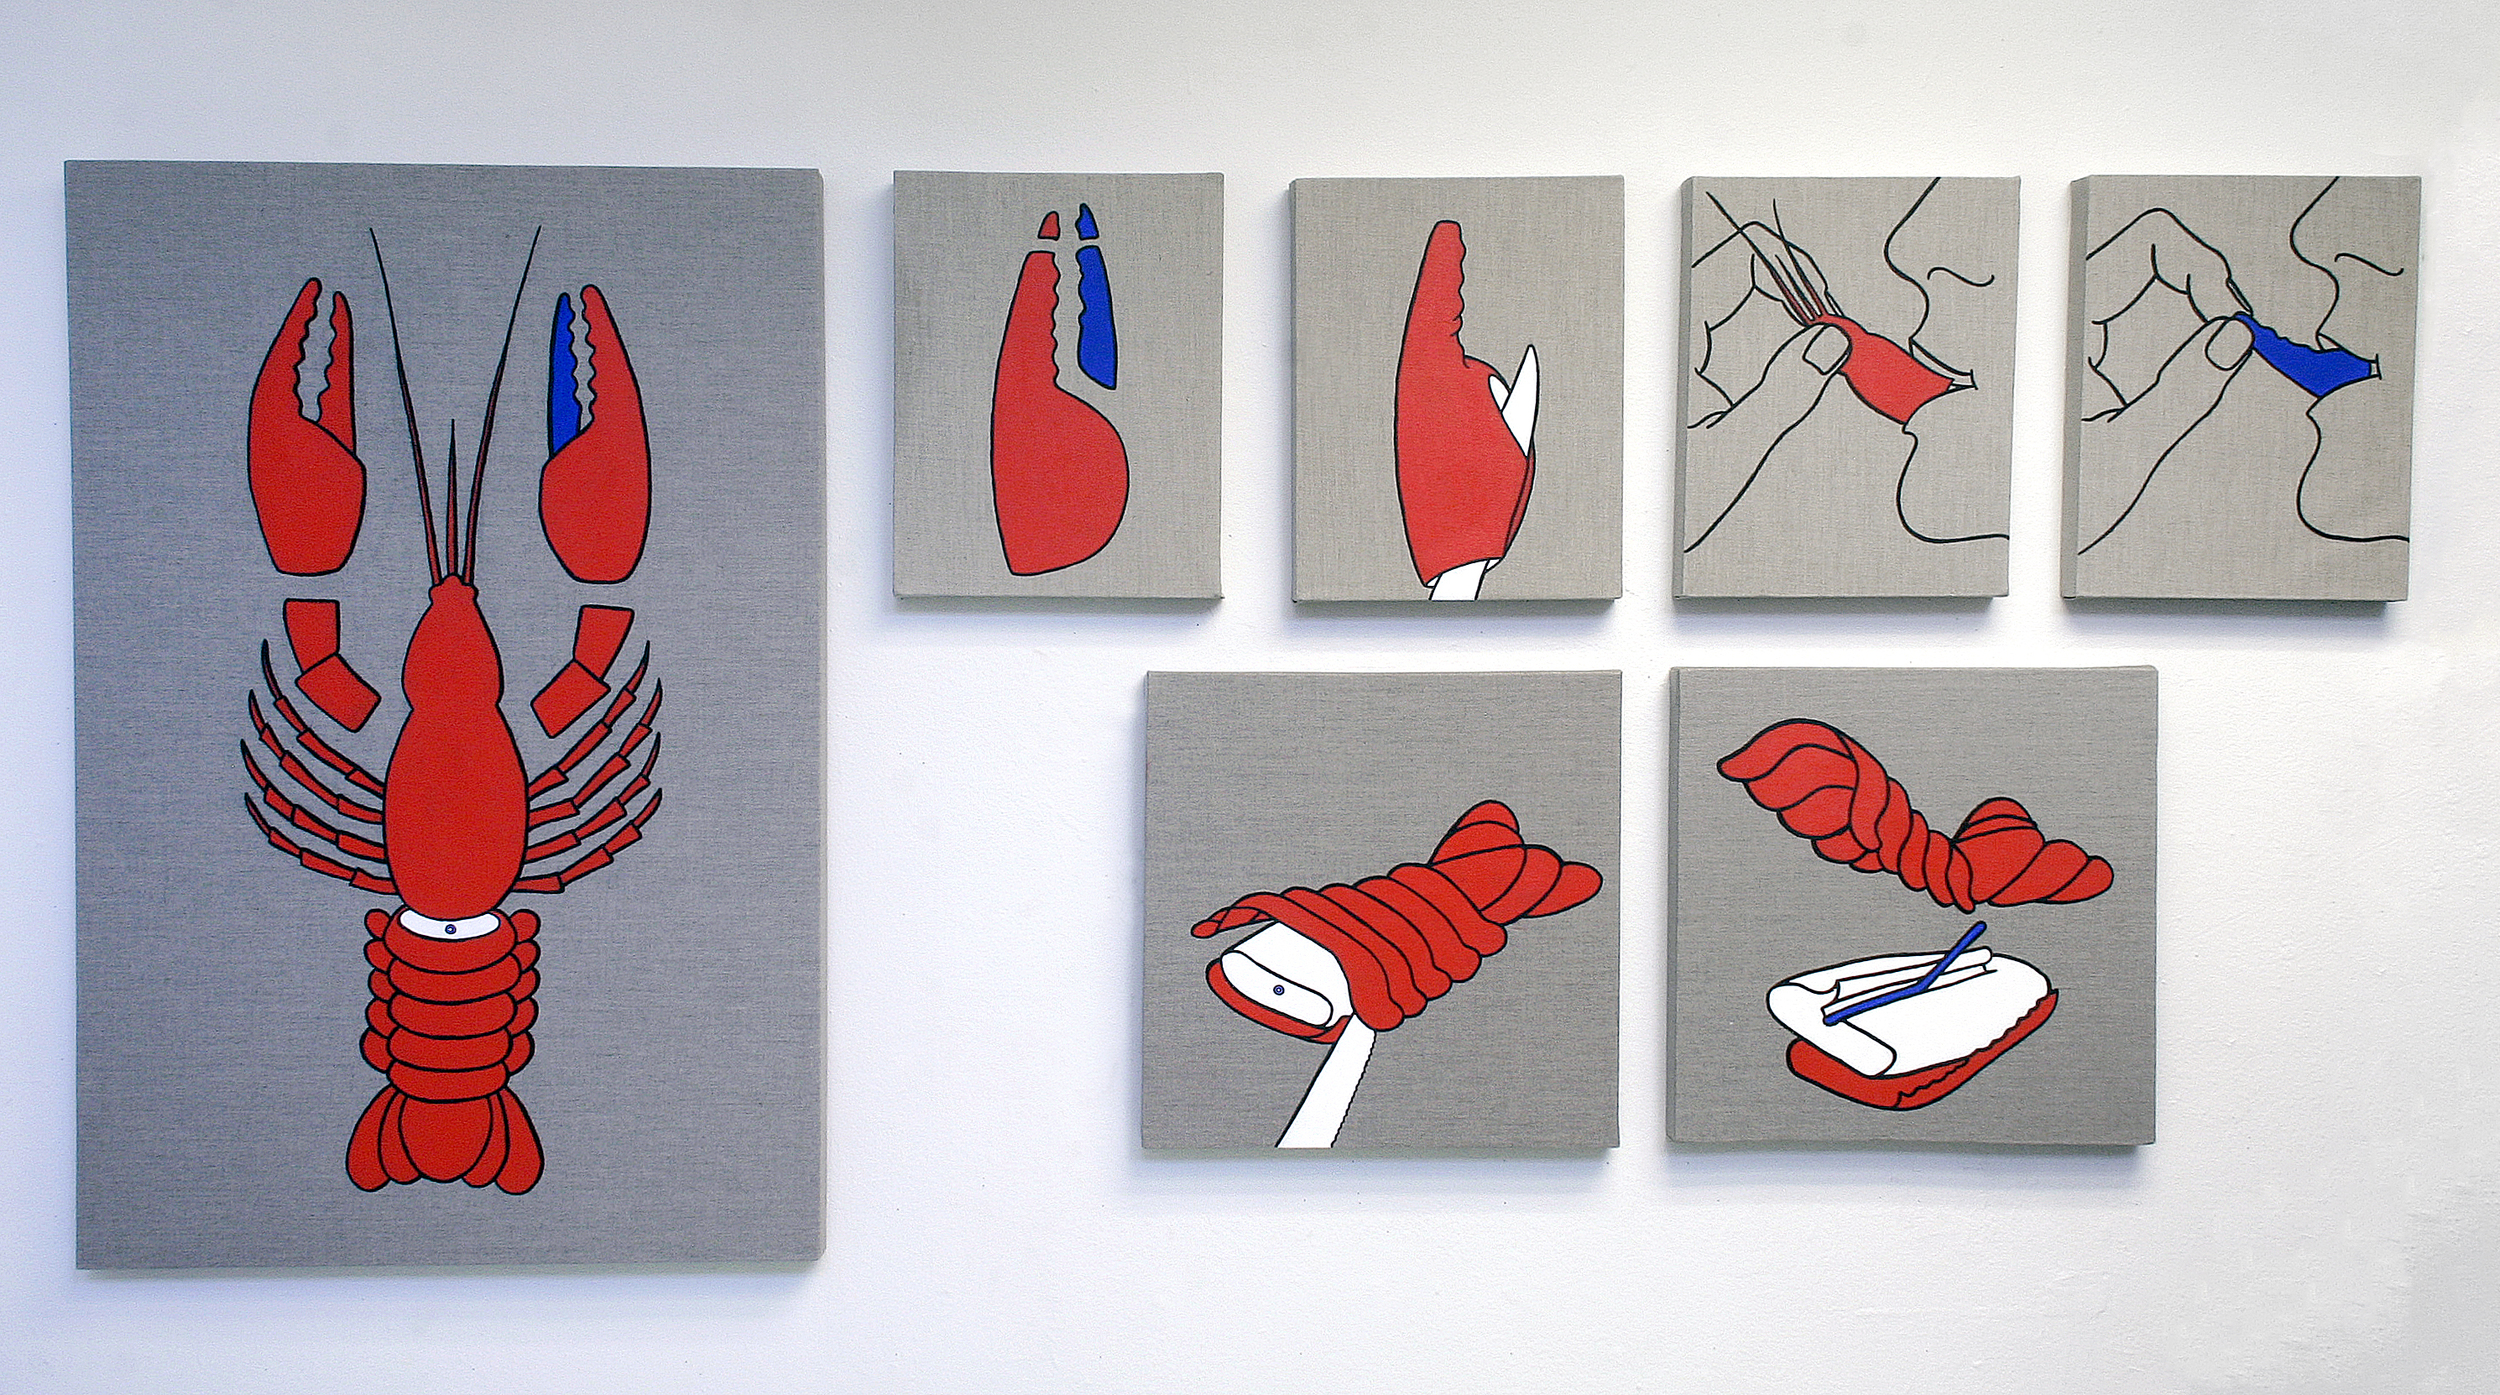   How to Eat Lobster (Blue Claw)  2011 installation of 7 acrylic on linen dimensions variable 